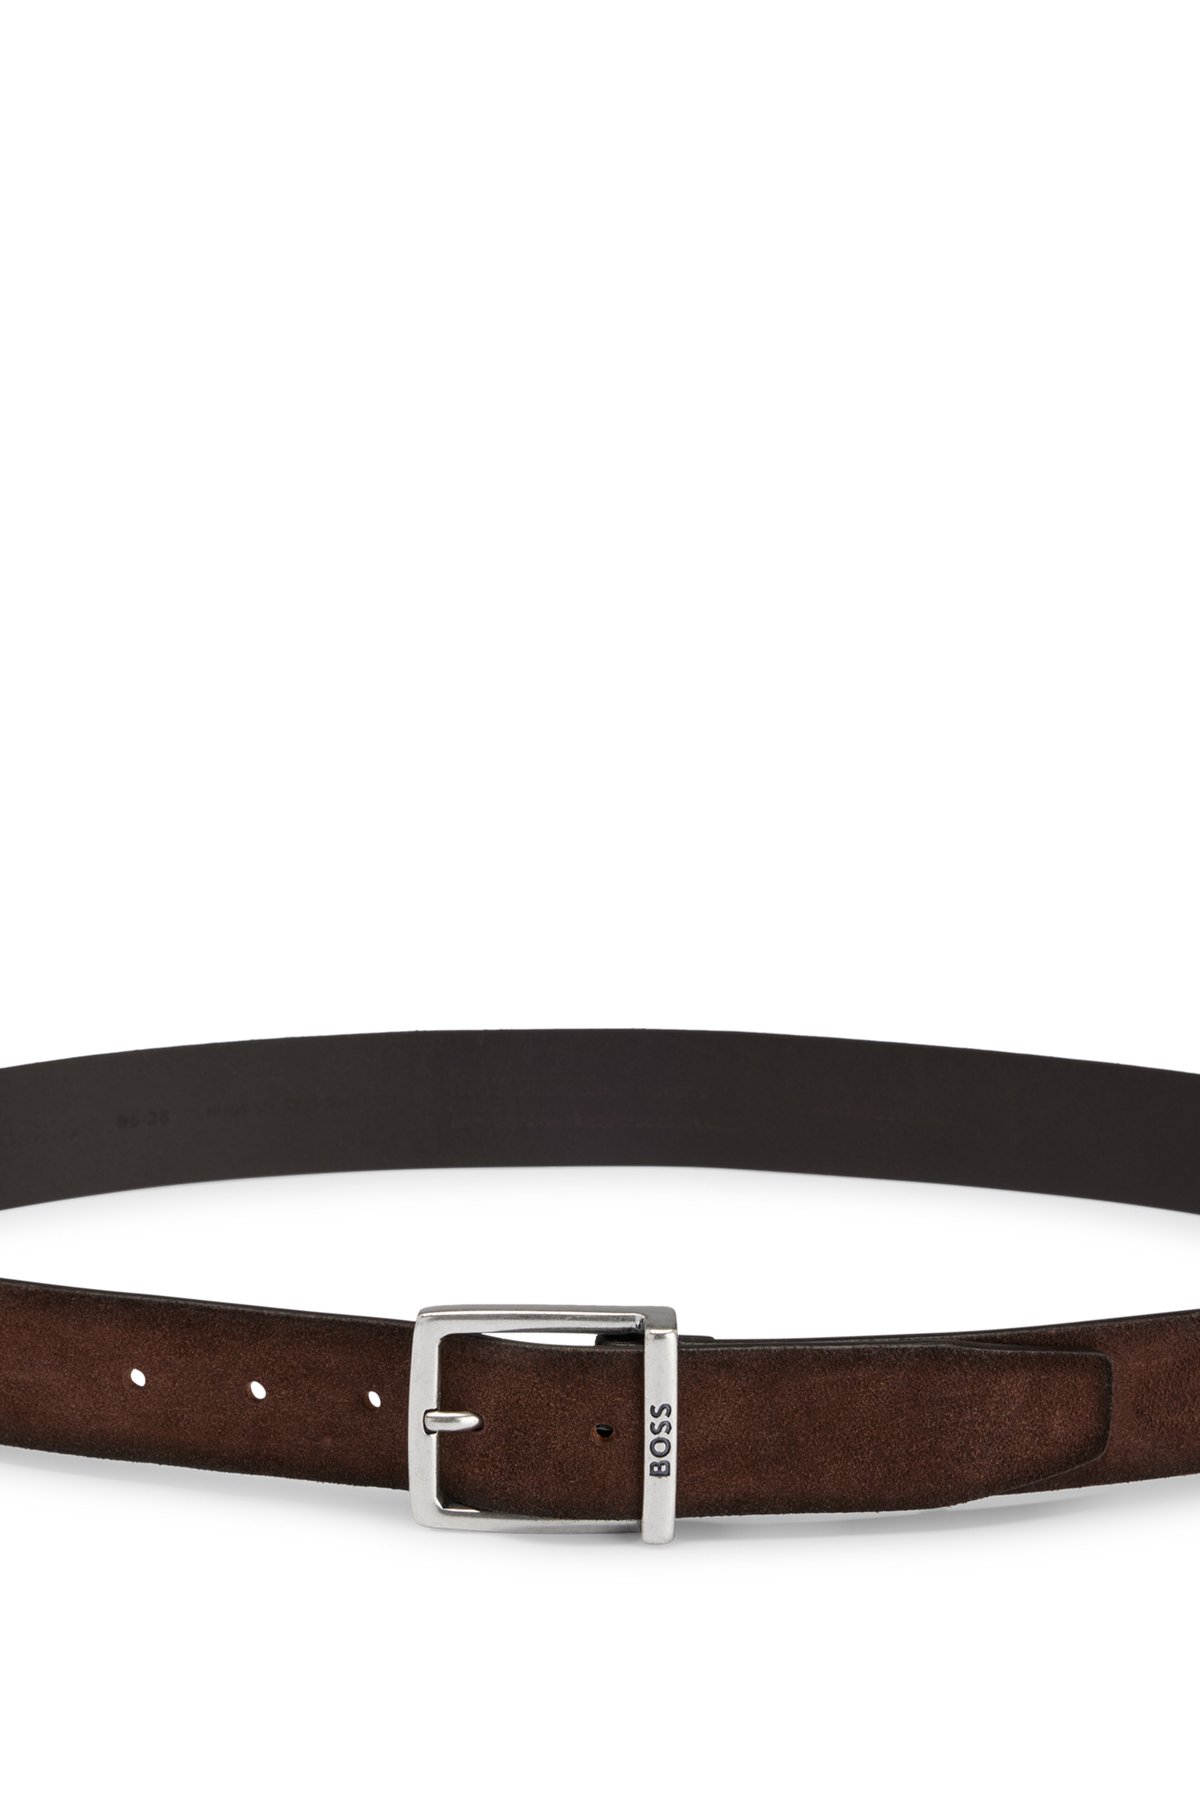 Suede belt with squared buckle and engraved logo, Dark Brown